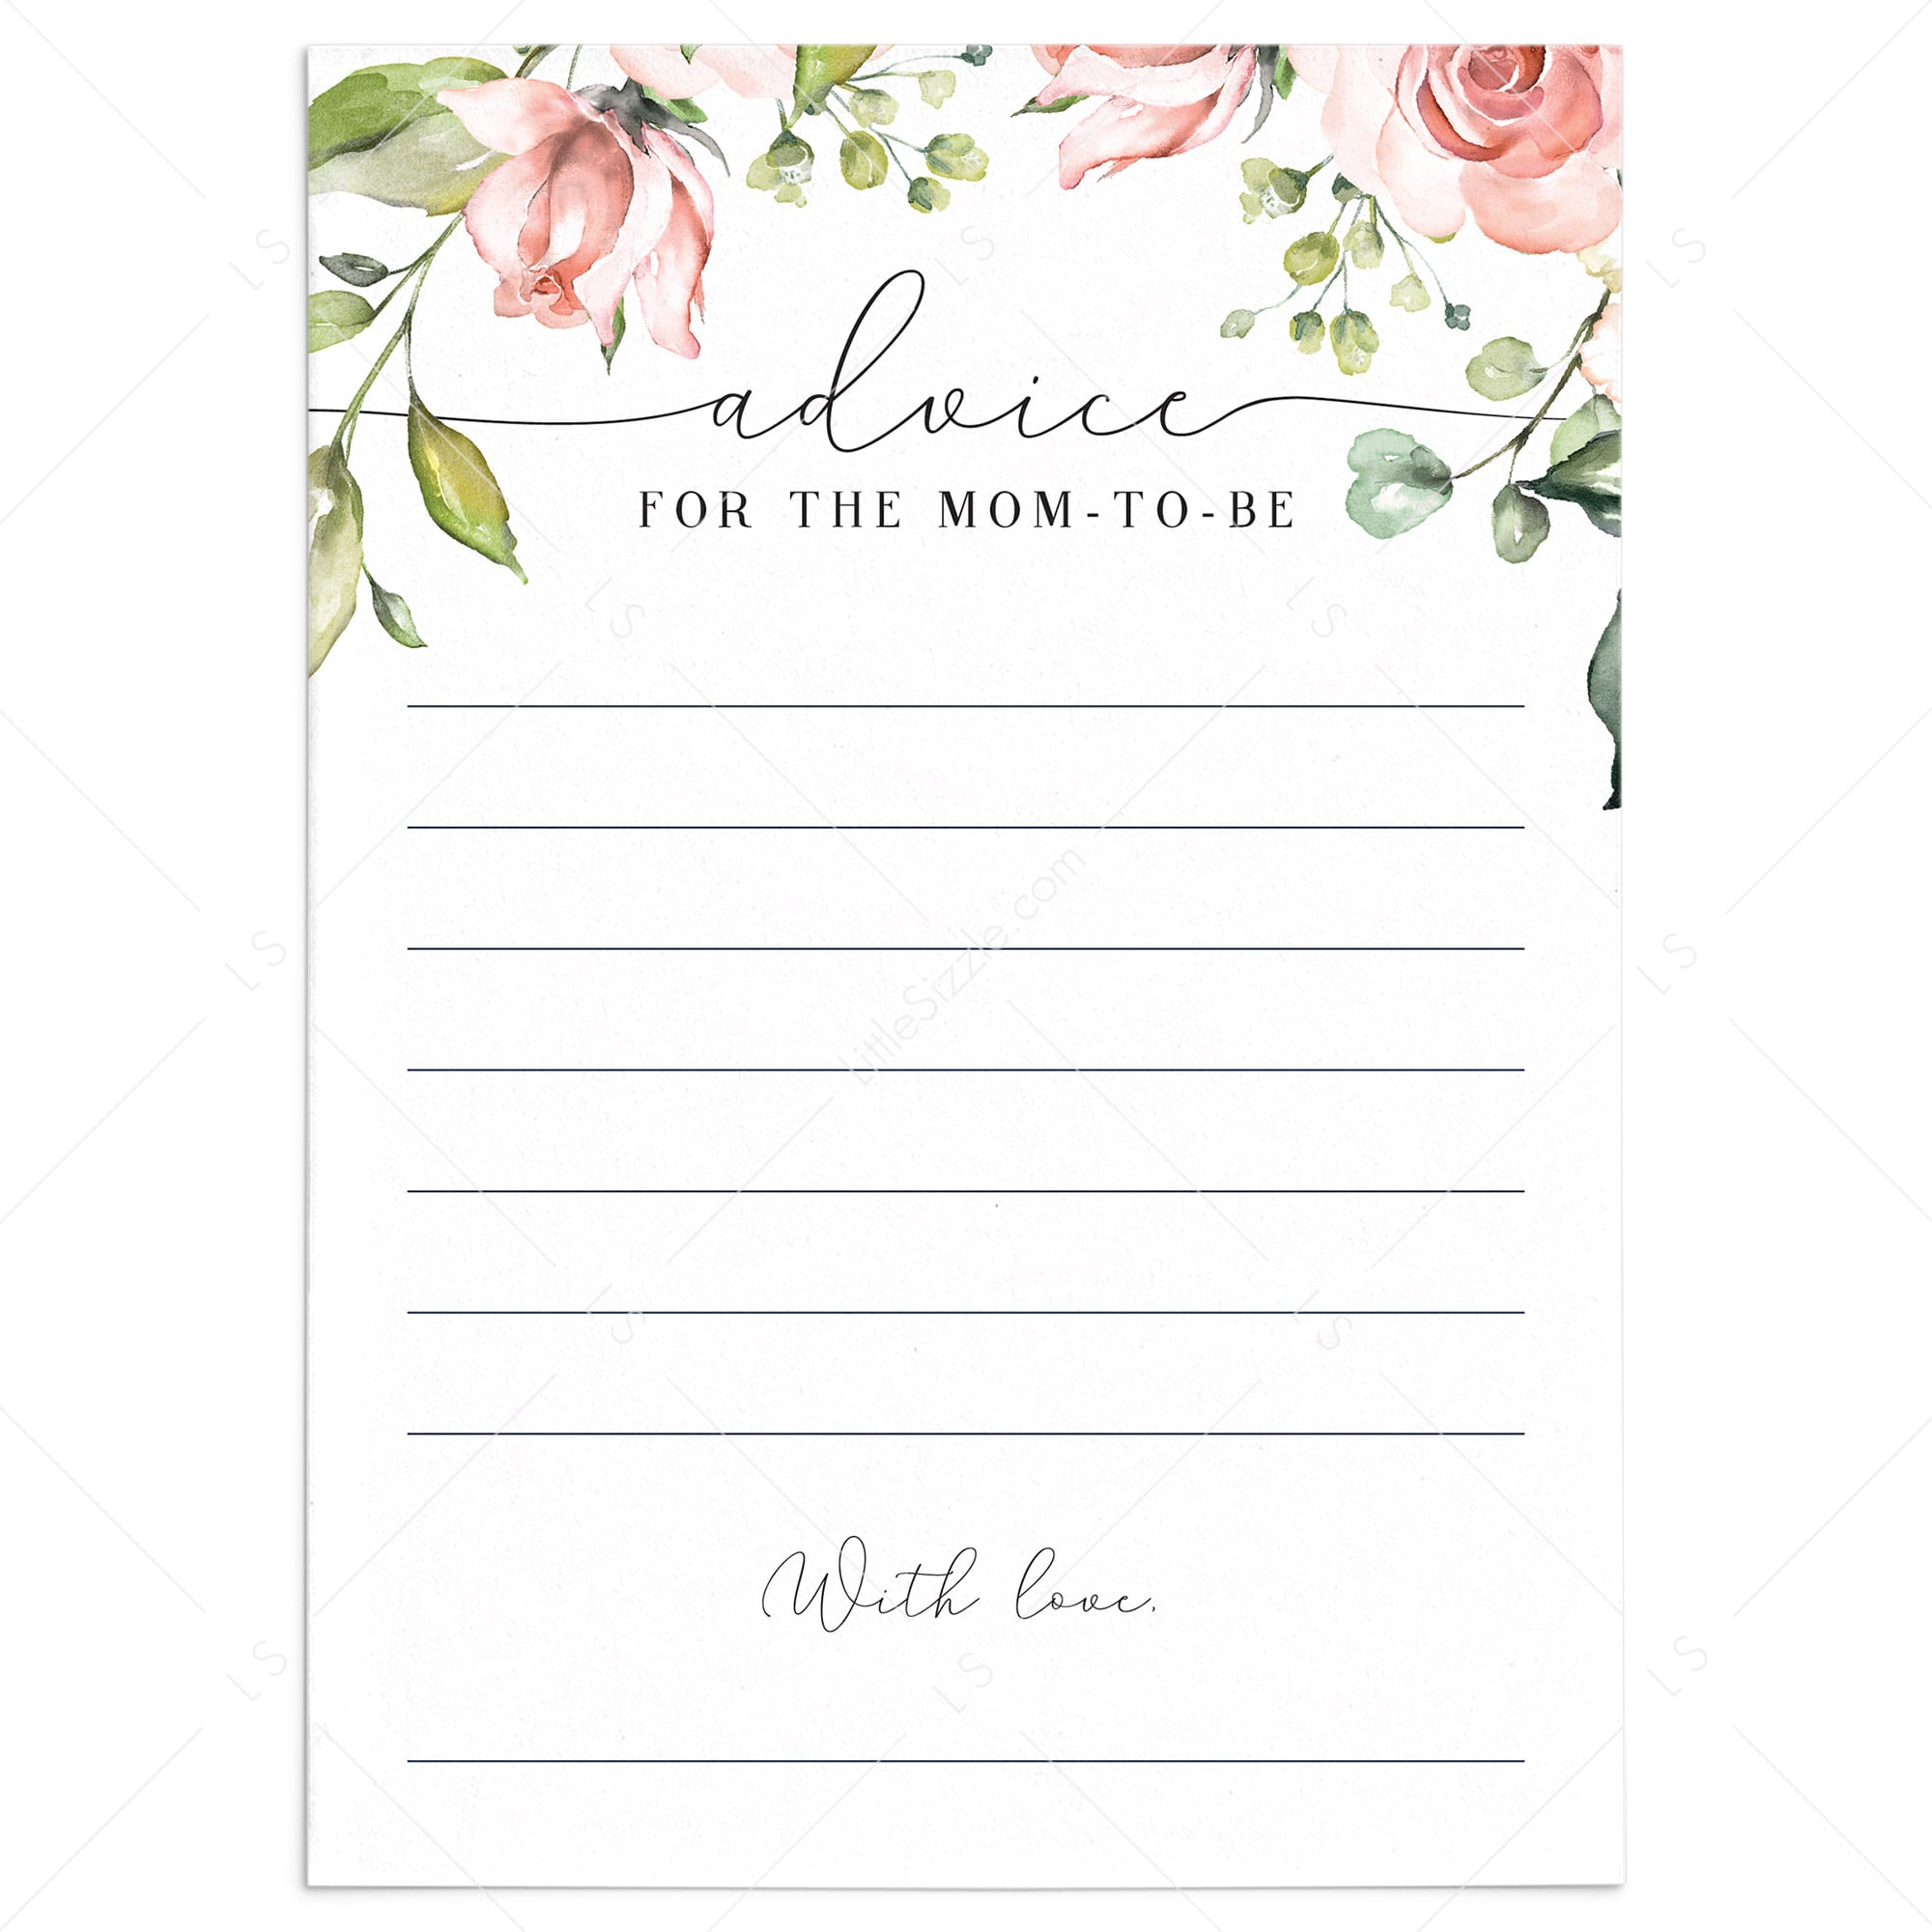 Advice for mom to be cards printable floral baby shower by LittleSizzle